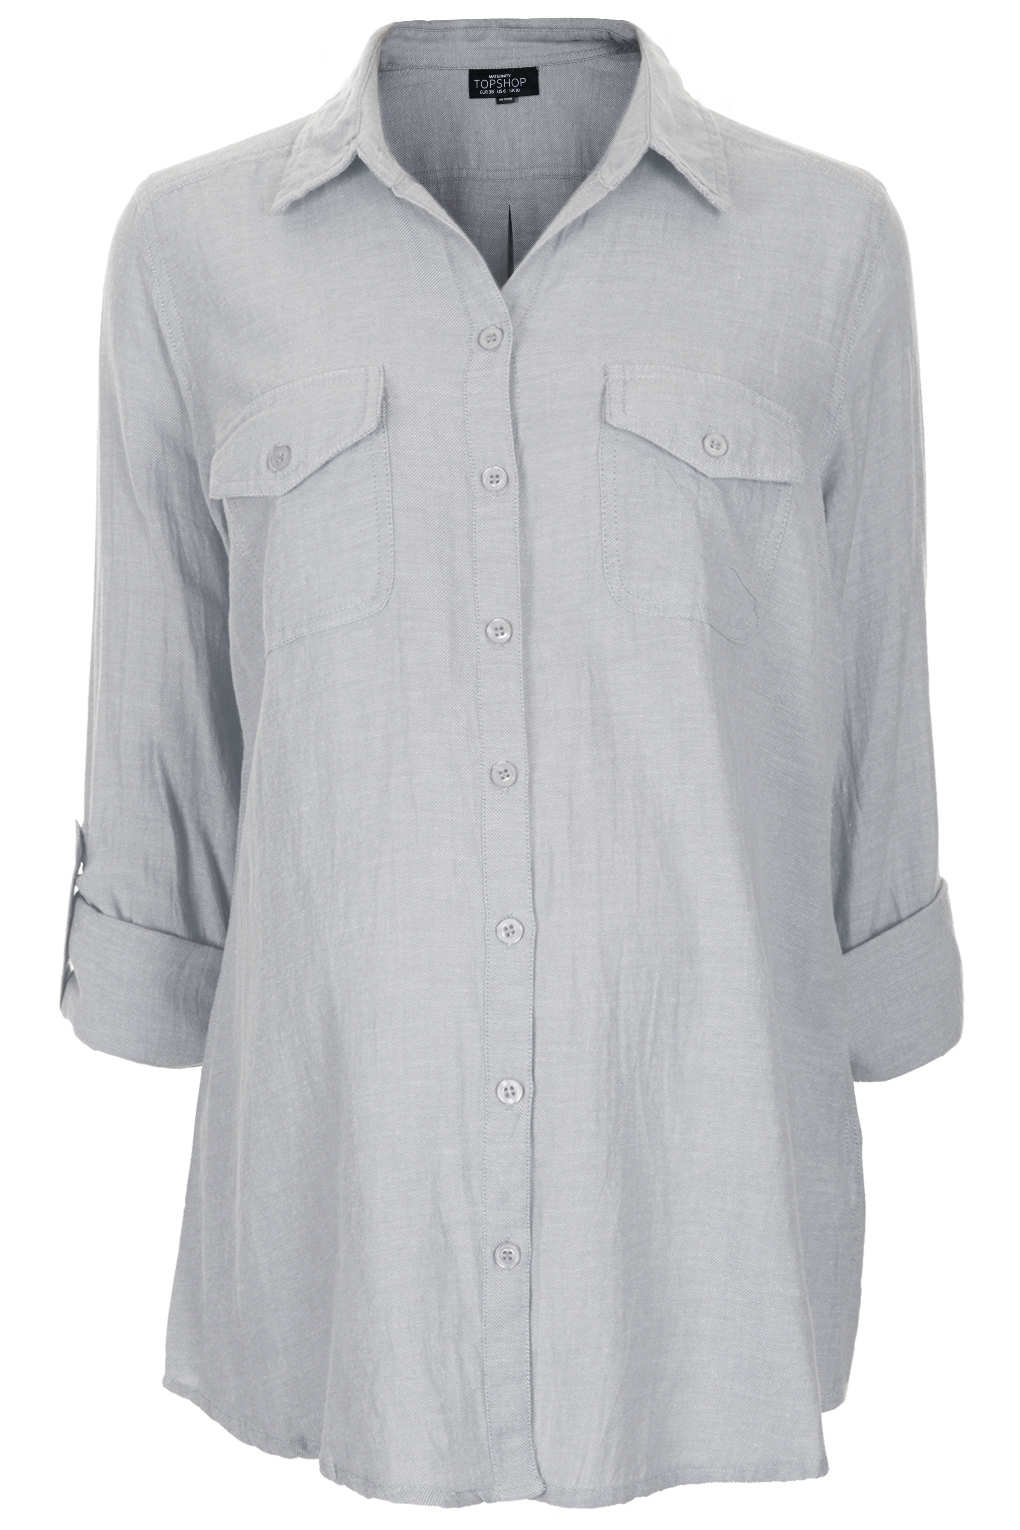 Lyst - Topshop Maternity Casual Chambray Shirt in Gray